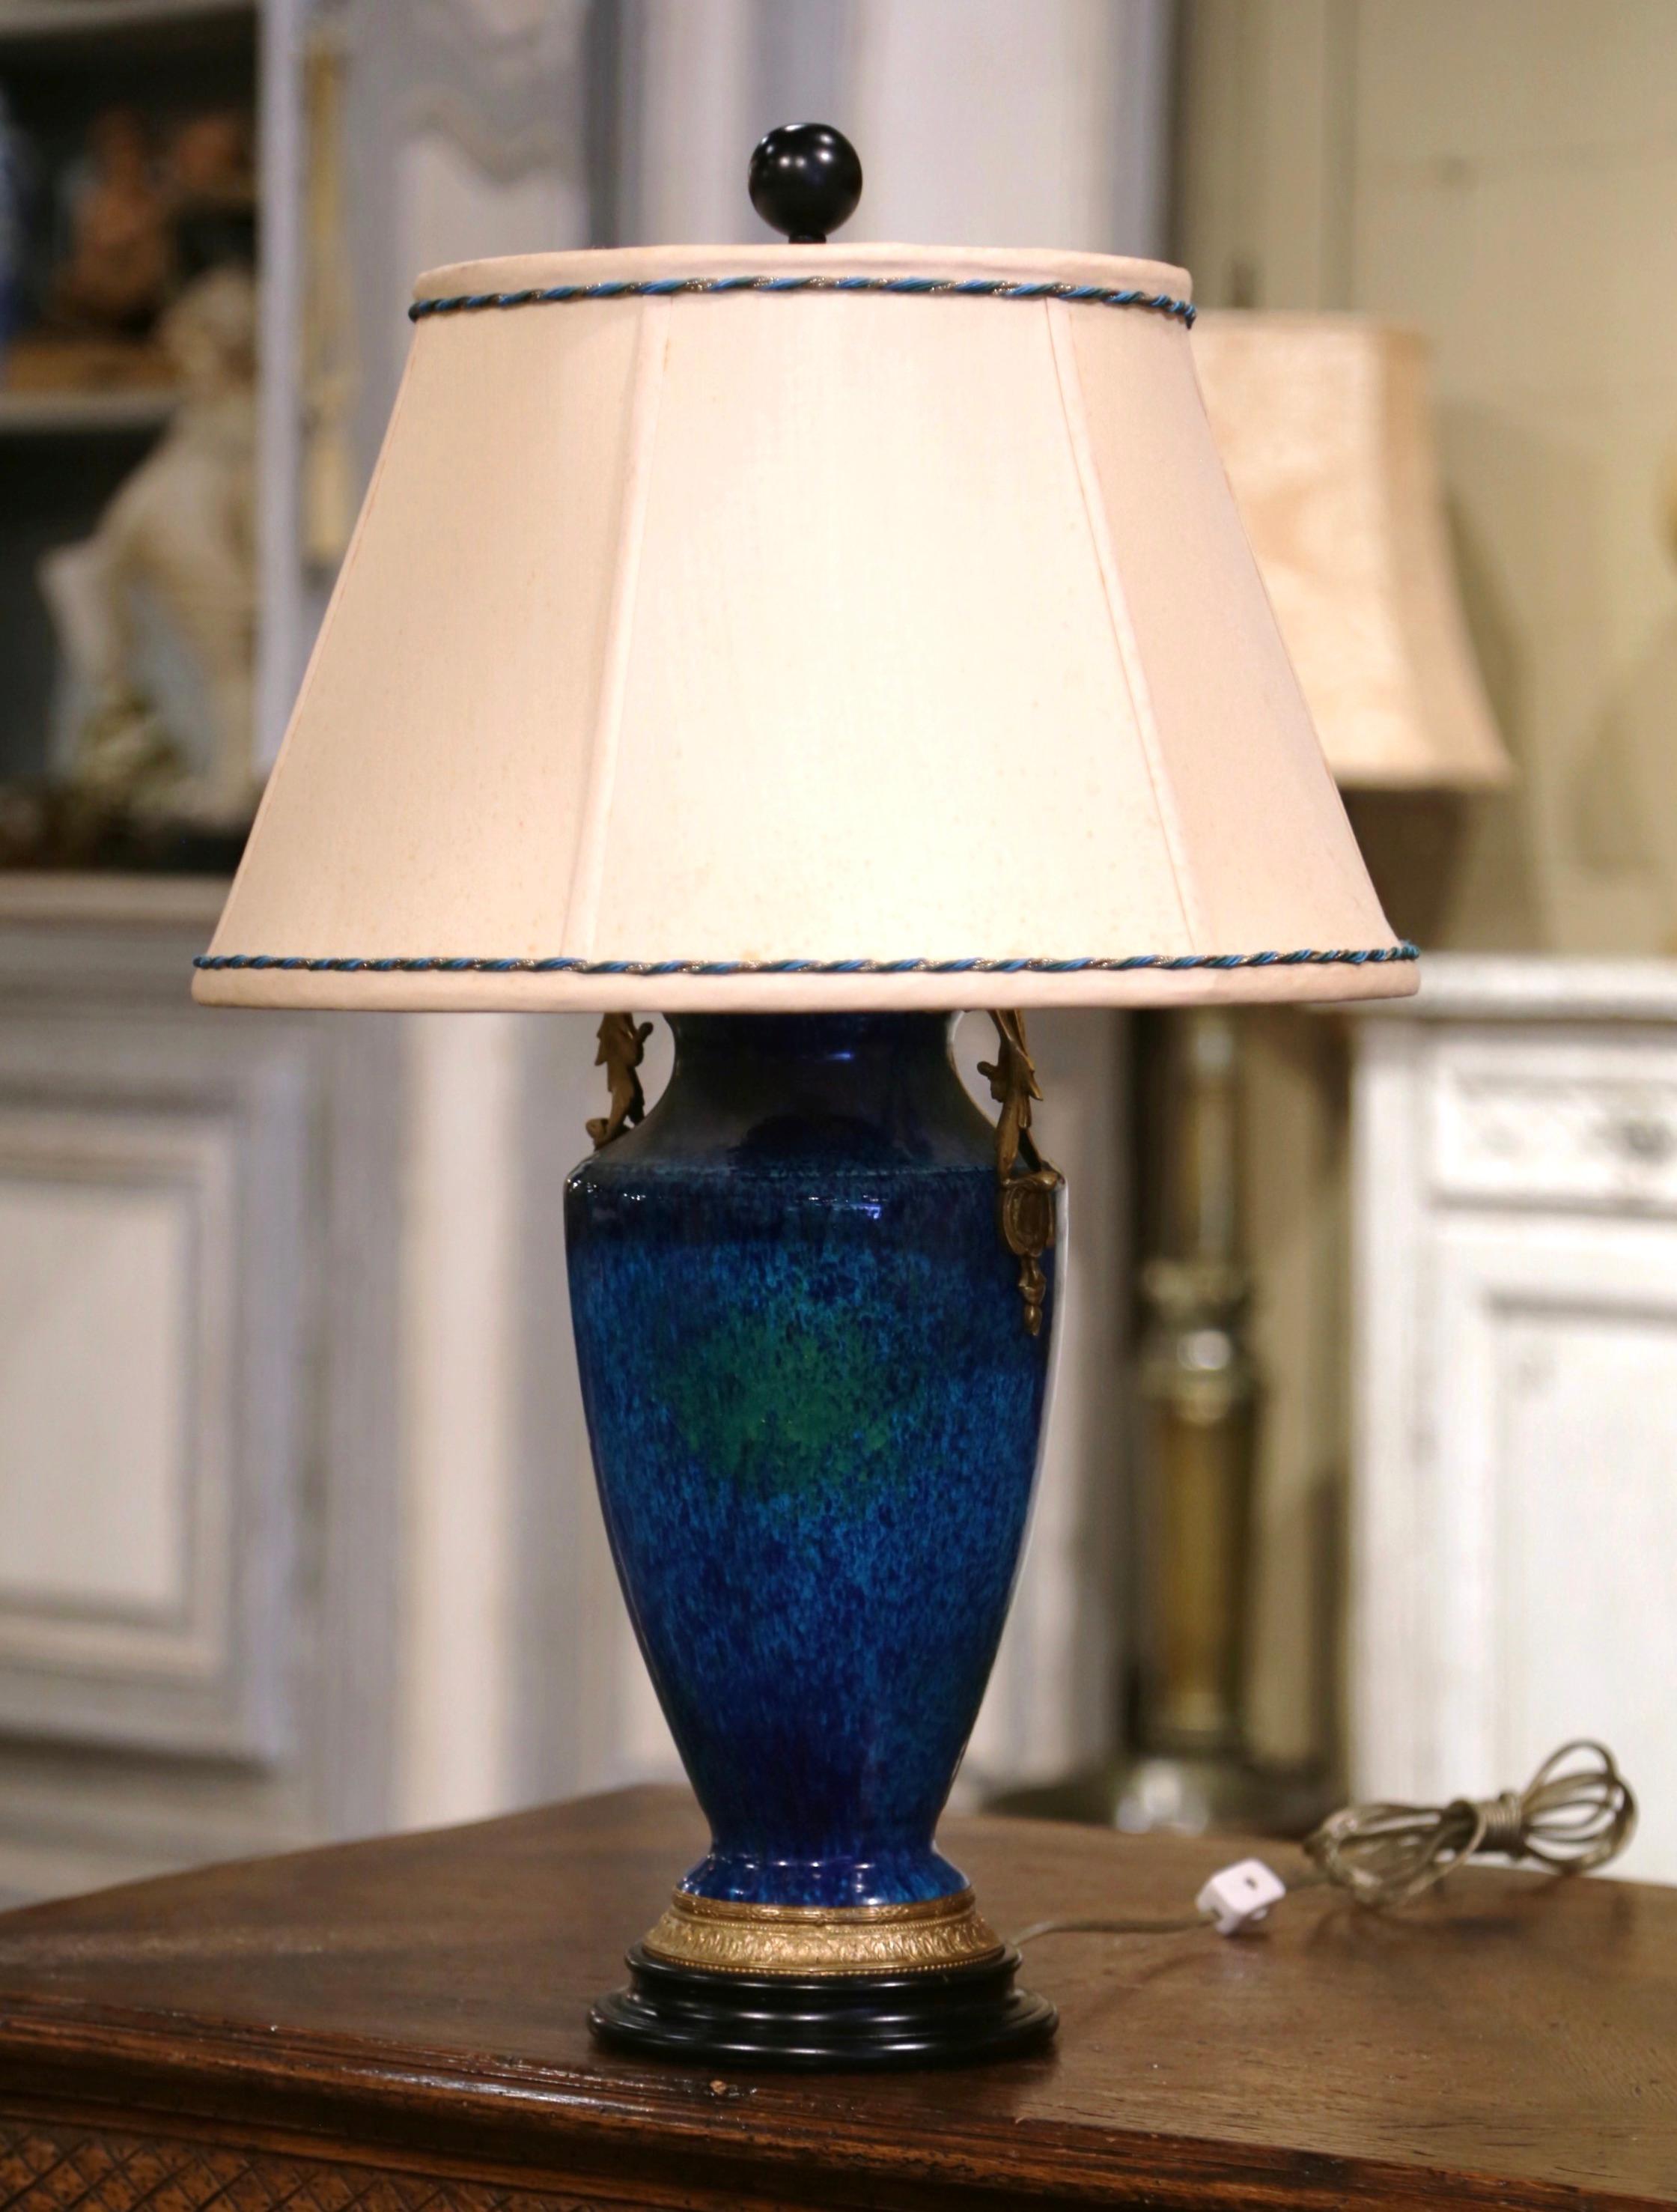 Add the perfect blue accent to your home with this colorful porcelain urn lamp. Crafted in France circa 1950, the ceramic vase stands on a circular wooden base and is accented with elegant bronze handles and a decorative carved bronze ring at the